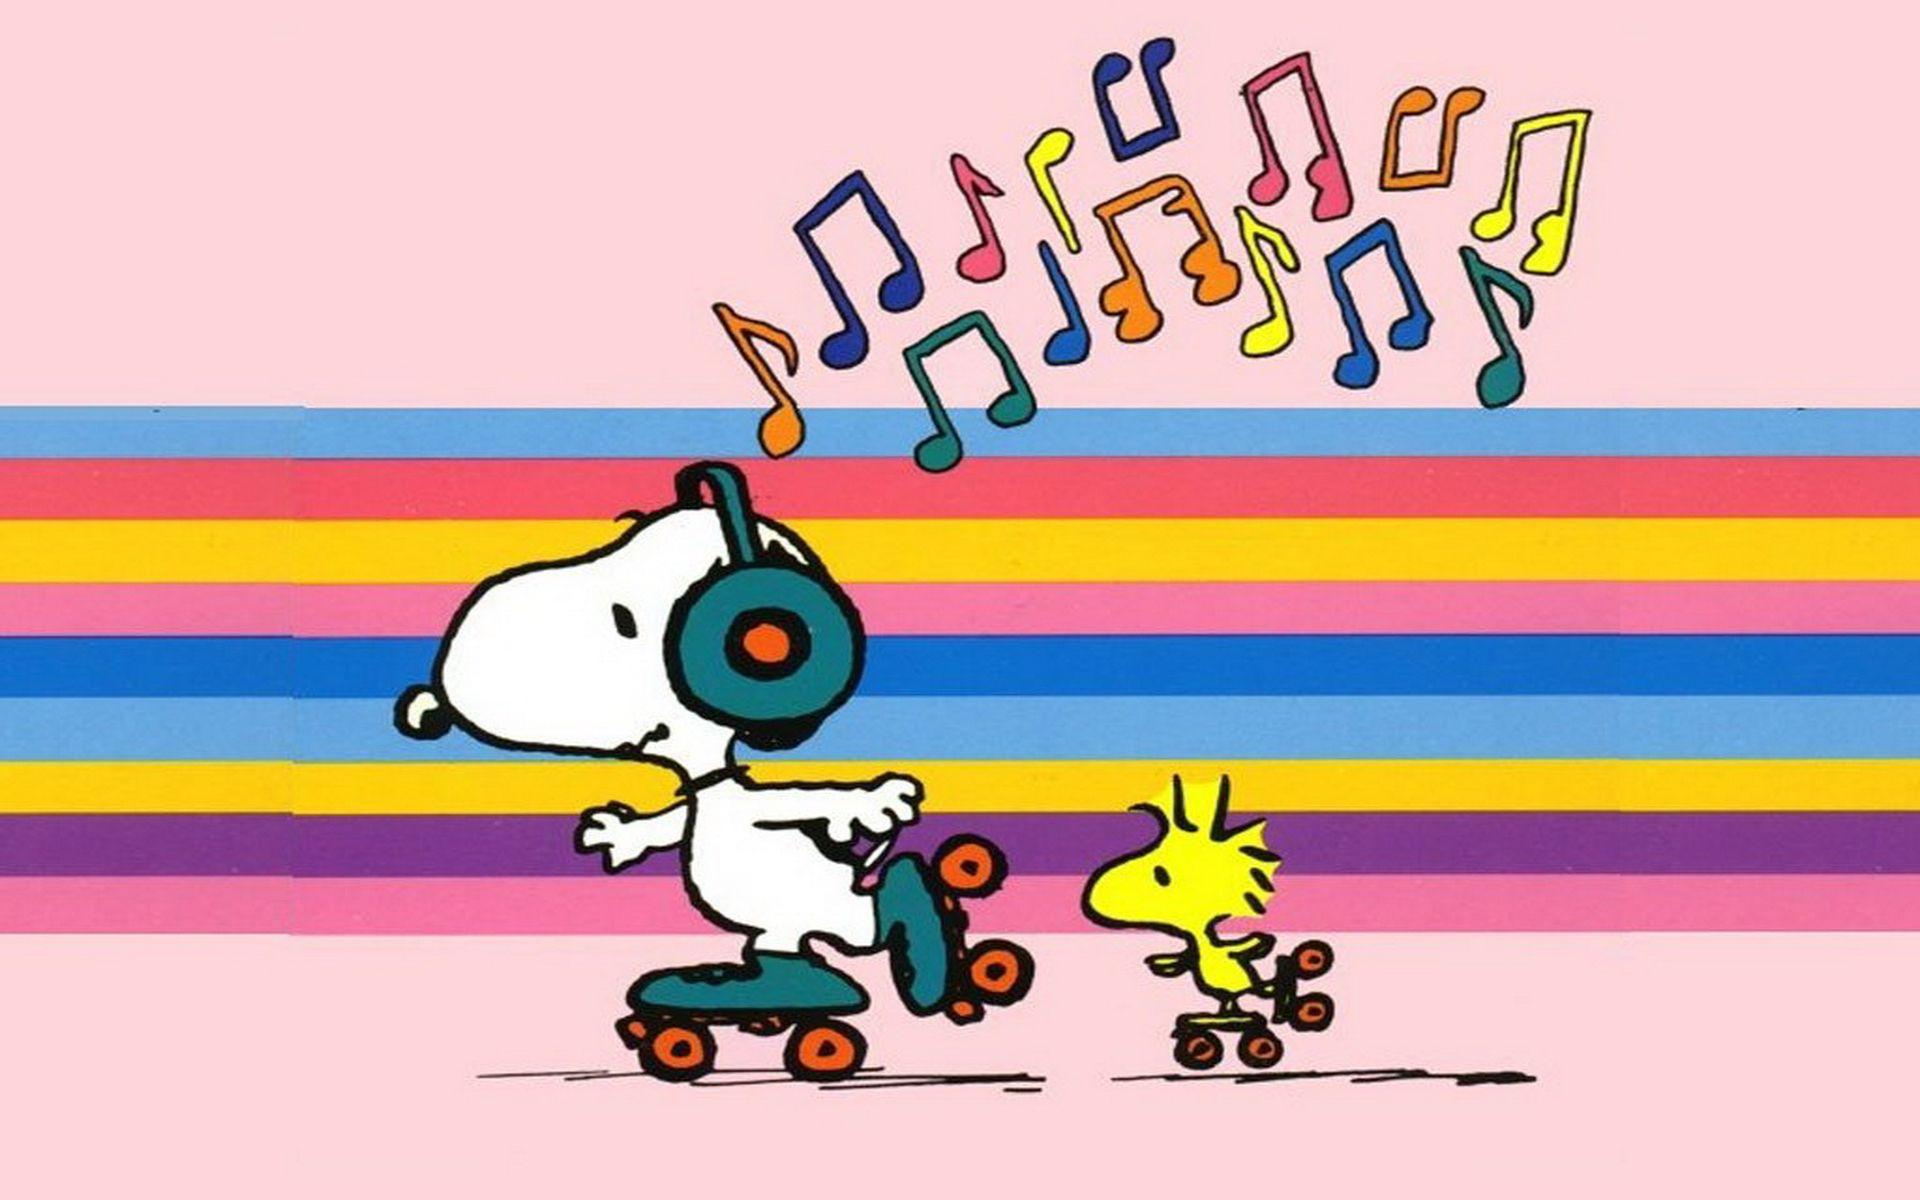 Snoopy And Woodstock Wallpapers Top Free Snoopy And Woodstock Backgrounds Wallpaperaccess